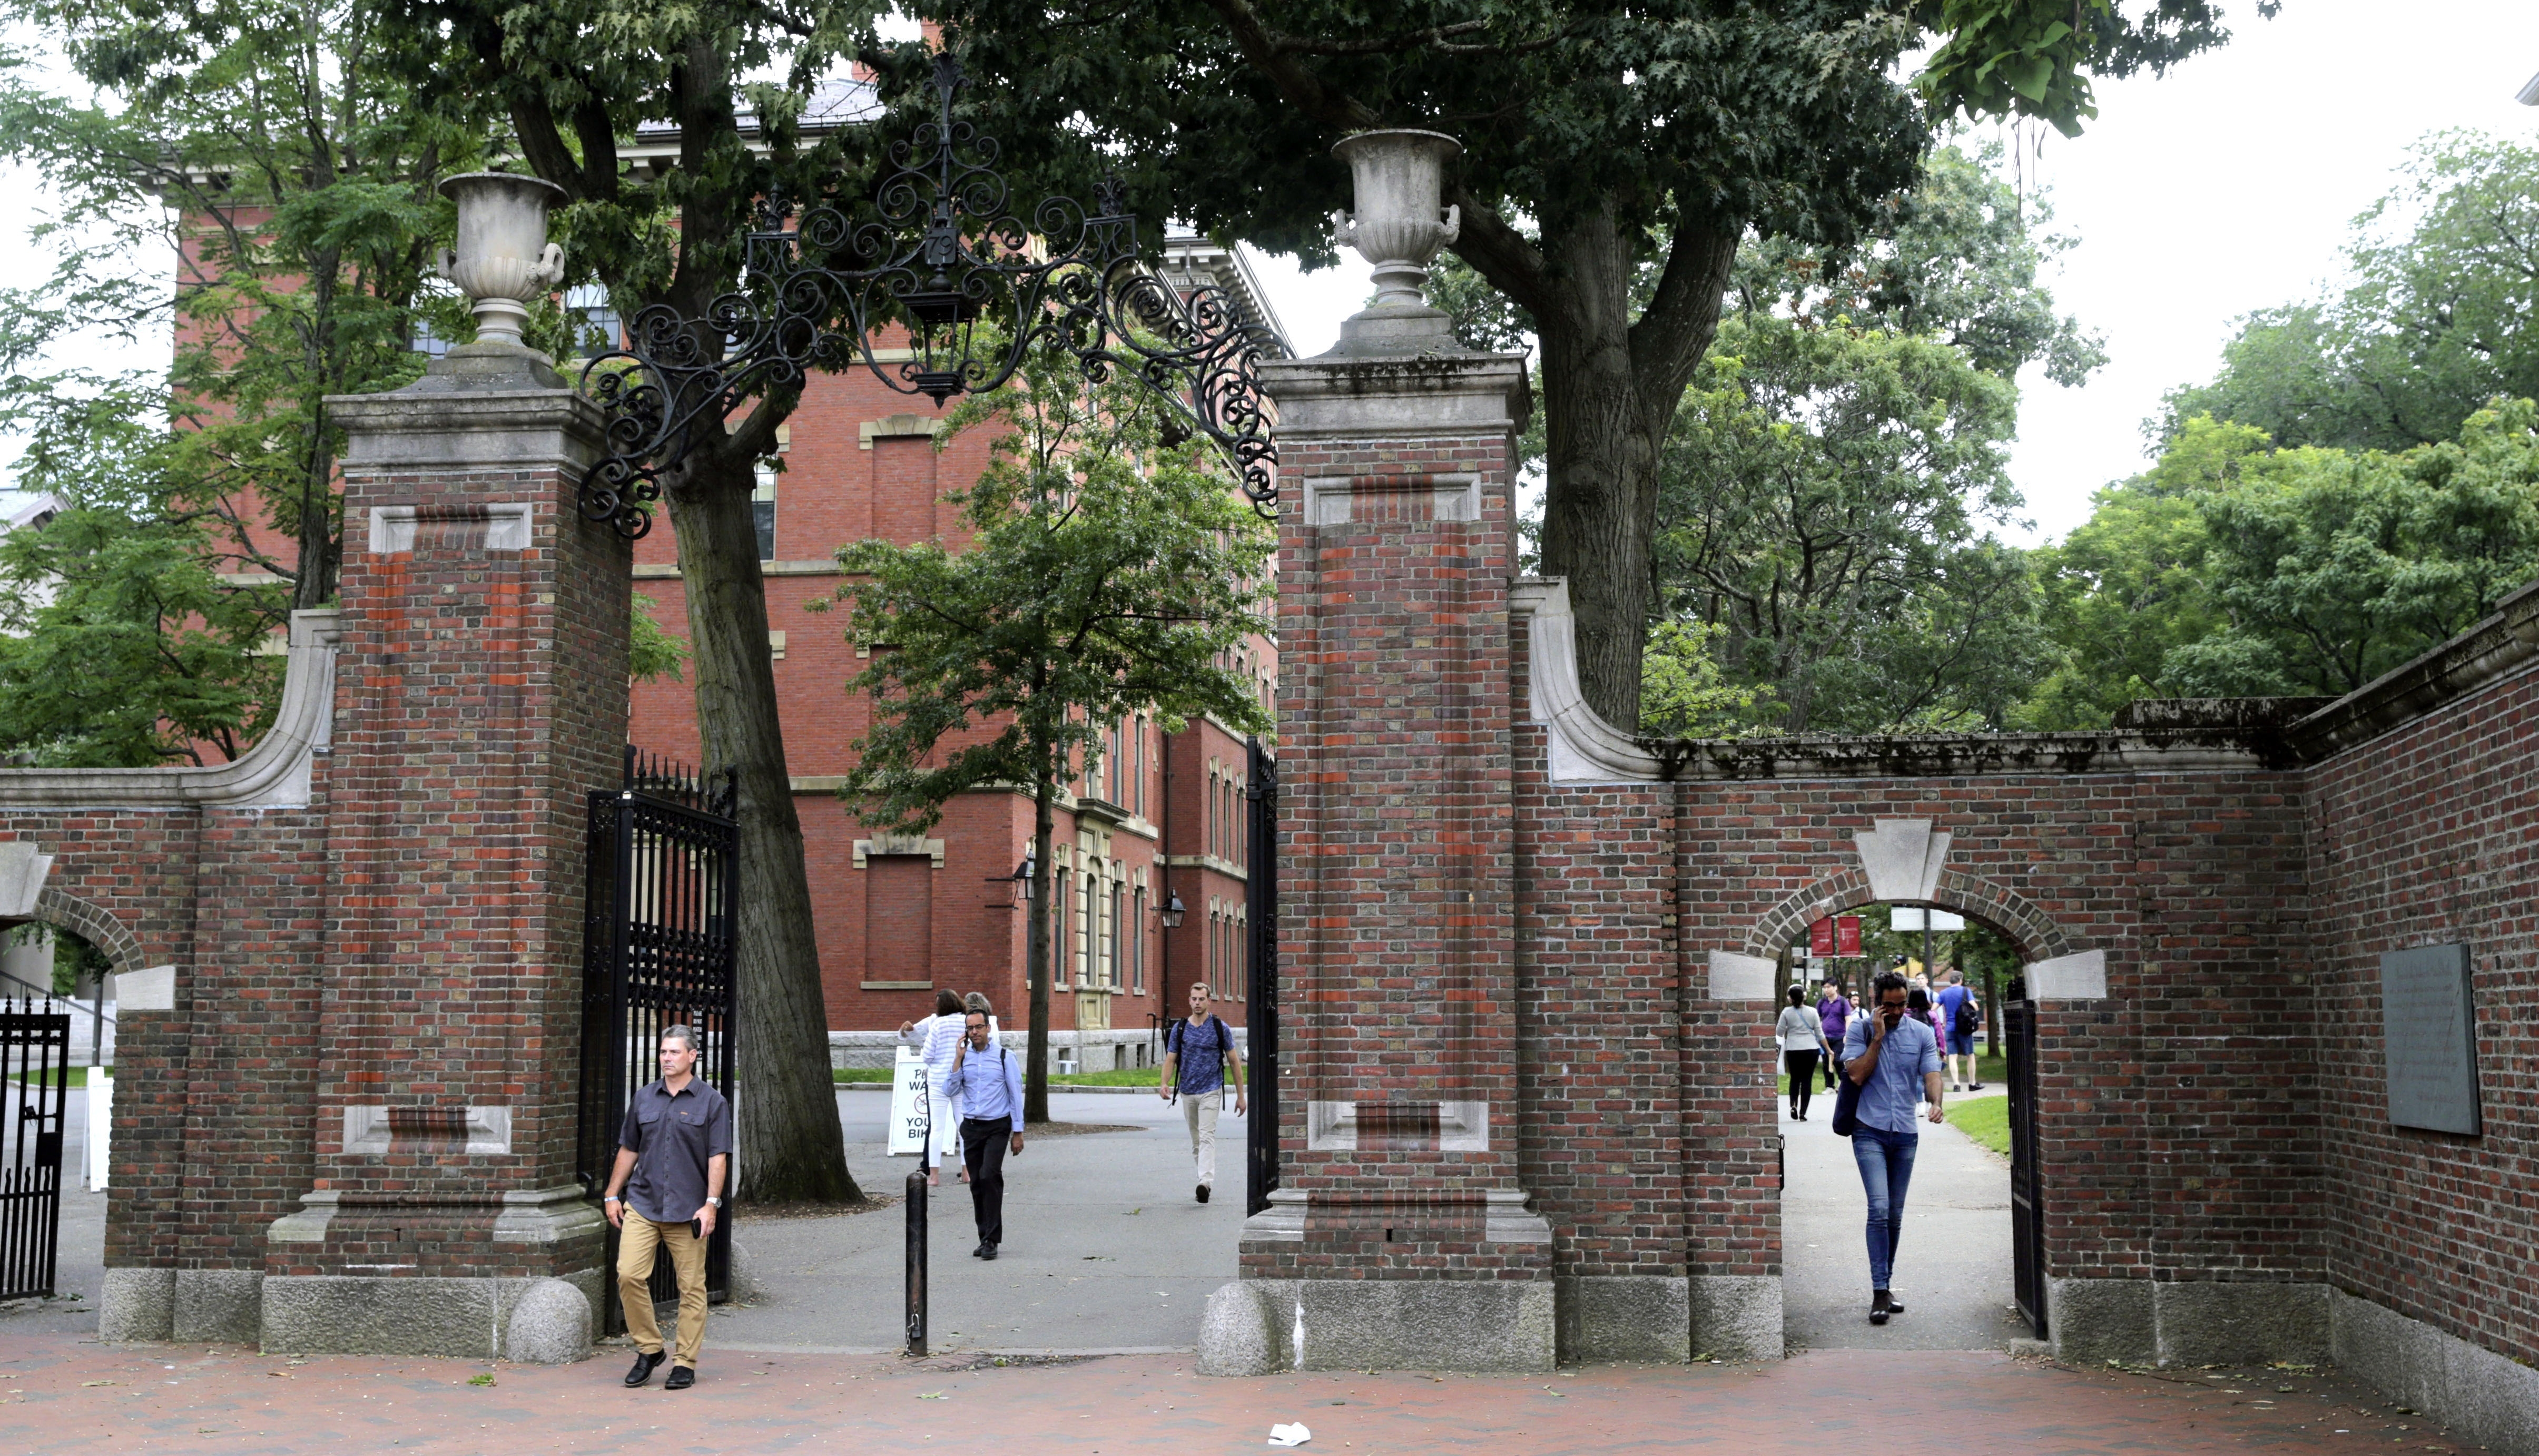  In this August 13, 2019, file photo, pedestrians walk through the gates of Harvard Yard at Harvard University in Cambridge, Mass. Harvard and the Massachusetts Institute of Technology filed a federal lawsuit Wednesday, July 8, 2020, challenging the Trump administration's decision to bar international students from staying in the US if they take classes entirely online this fall.  Photo: AP